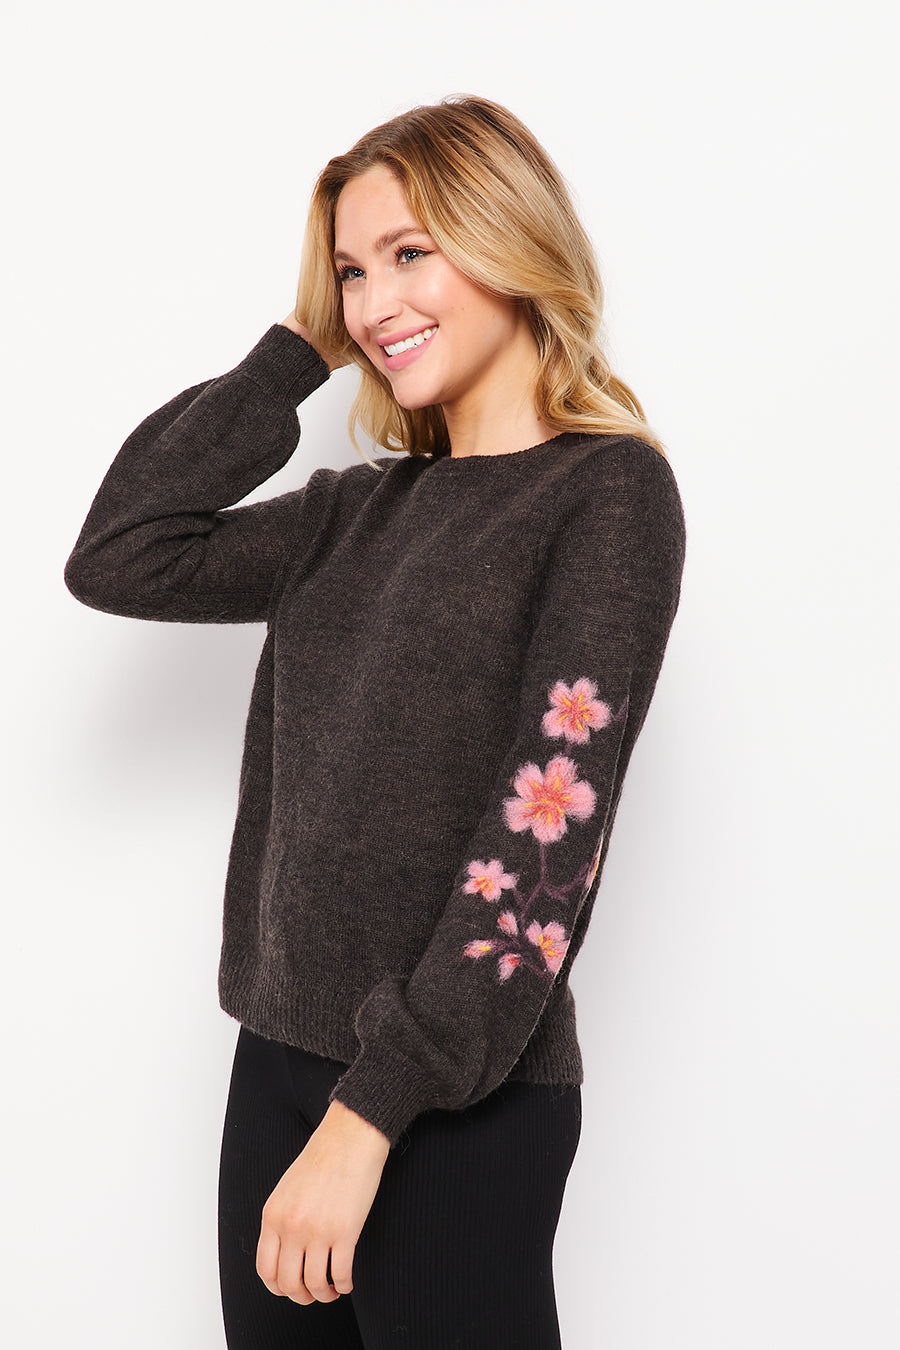 Cherry Blossom Sleeves - Charcoal